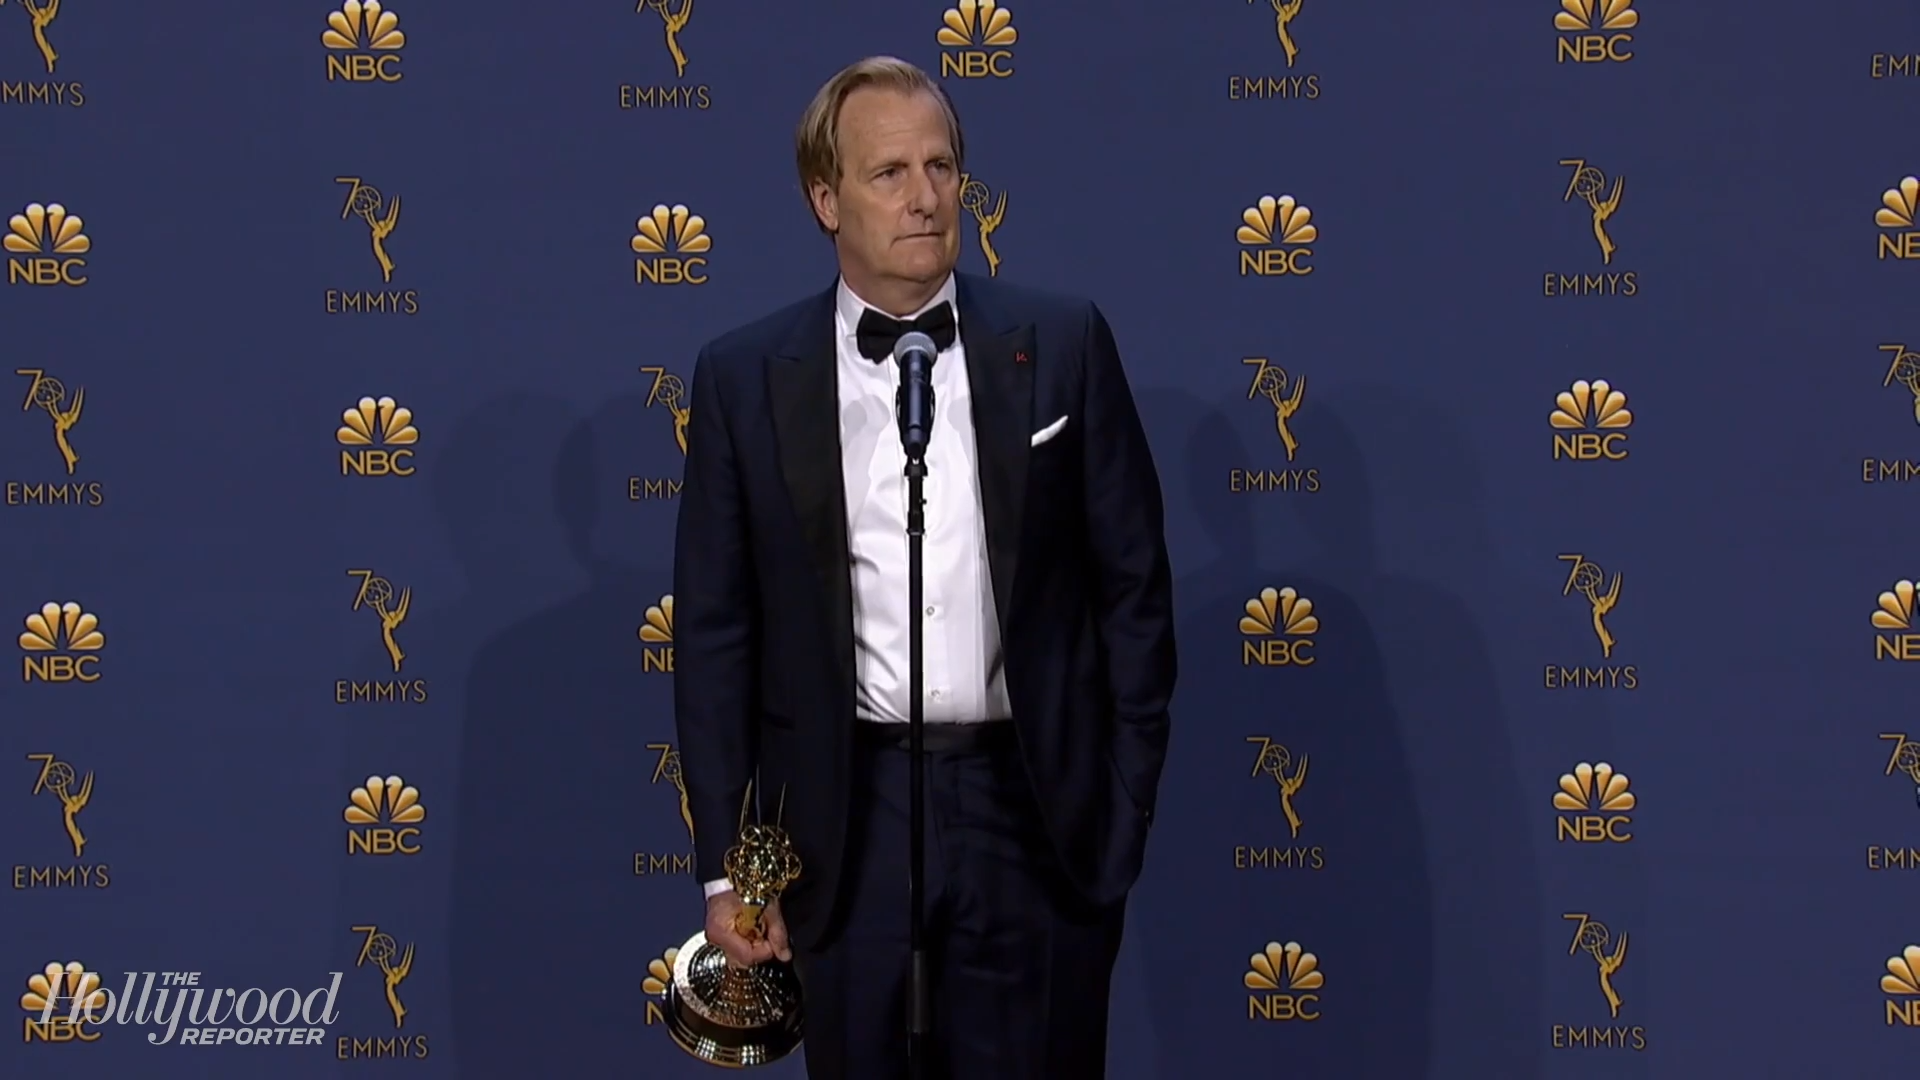 Jeff Daniels Says Meryl Streep Taught Him to "Leave a Lot to Chance" When Acting | Emmys 2018